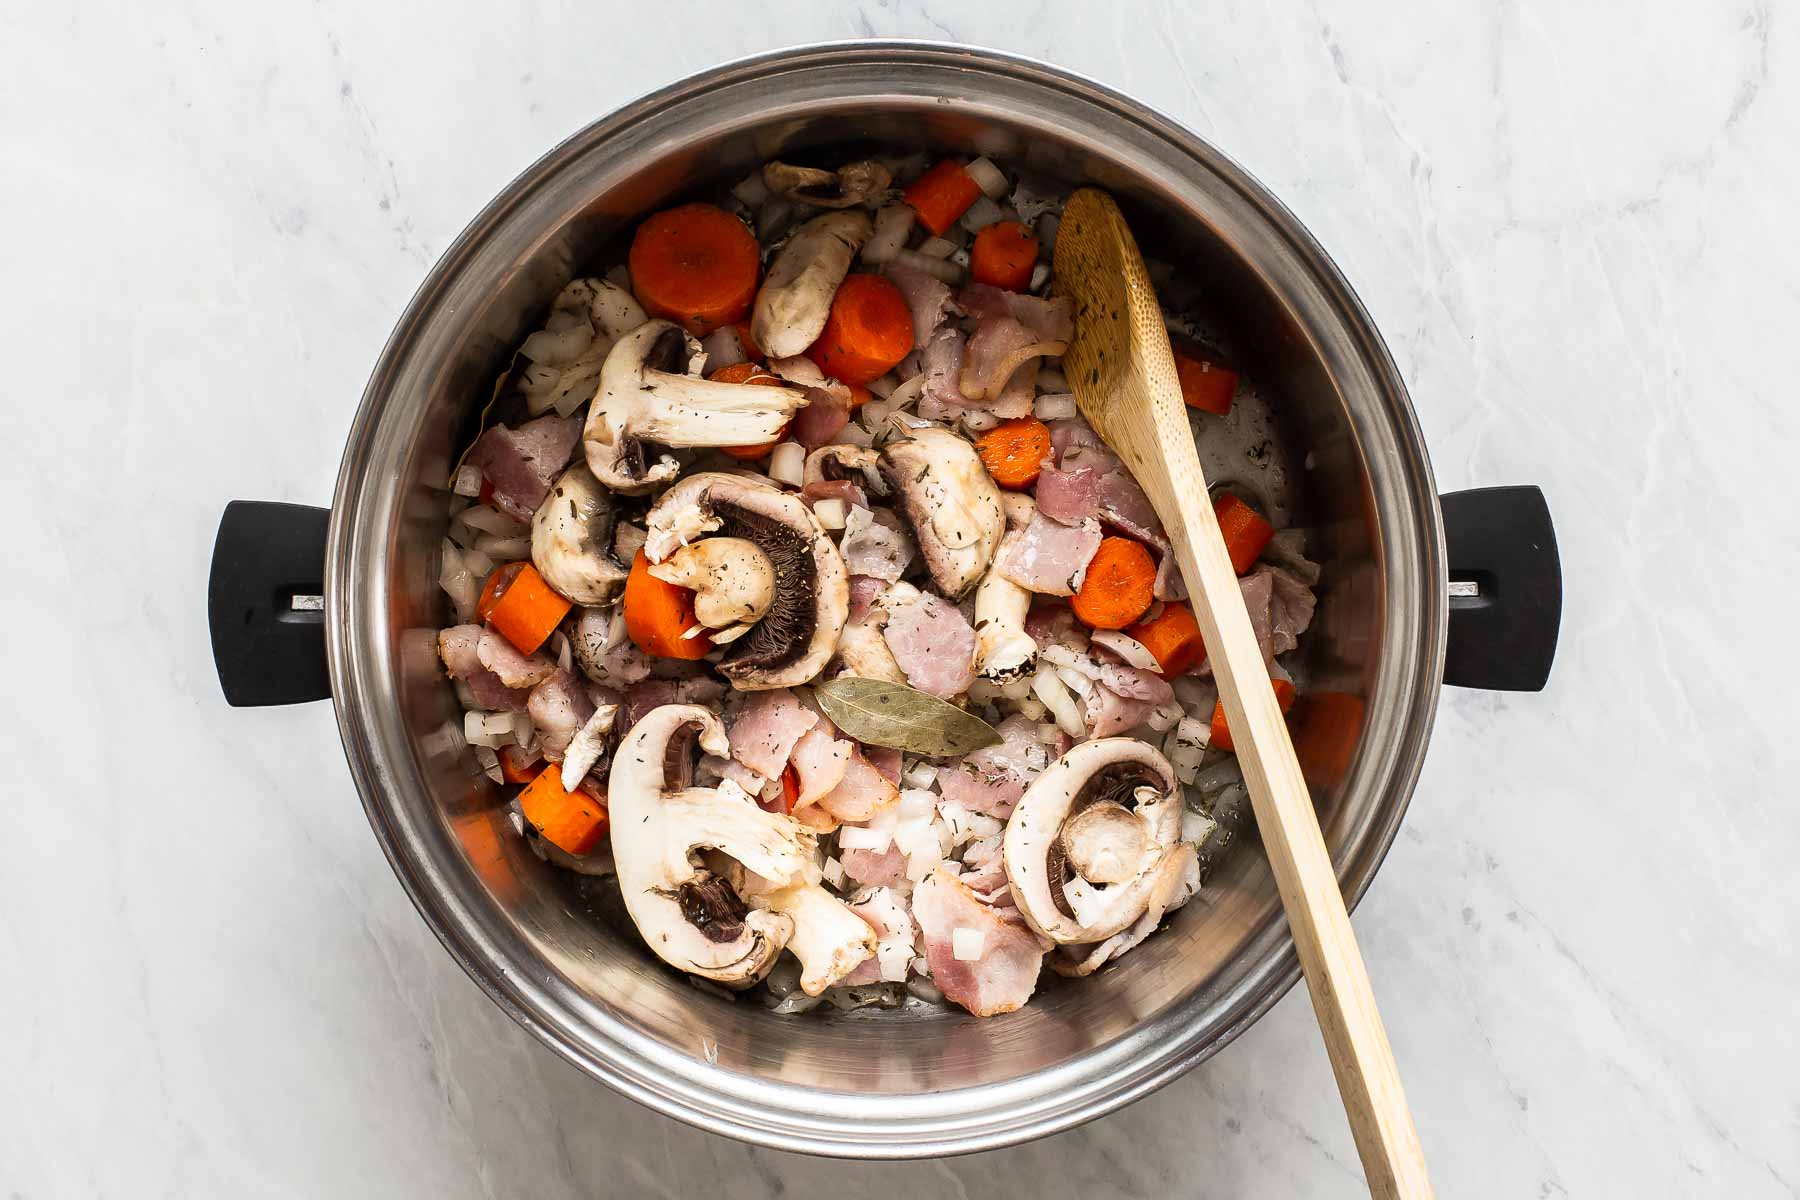 Mushrooms, carrots, onion, cooking in a stockpot.